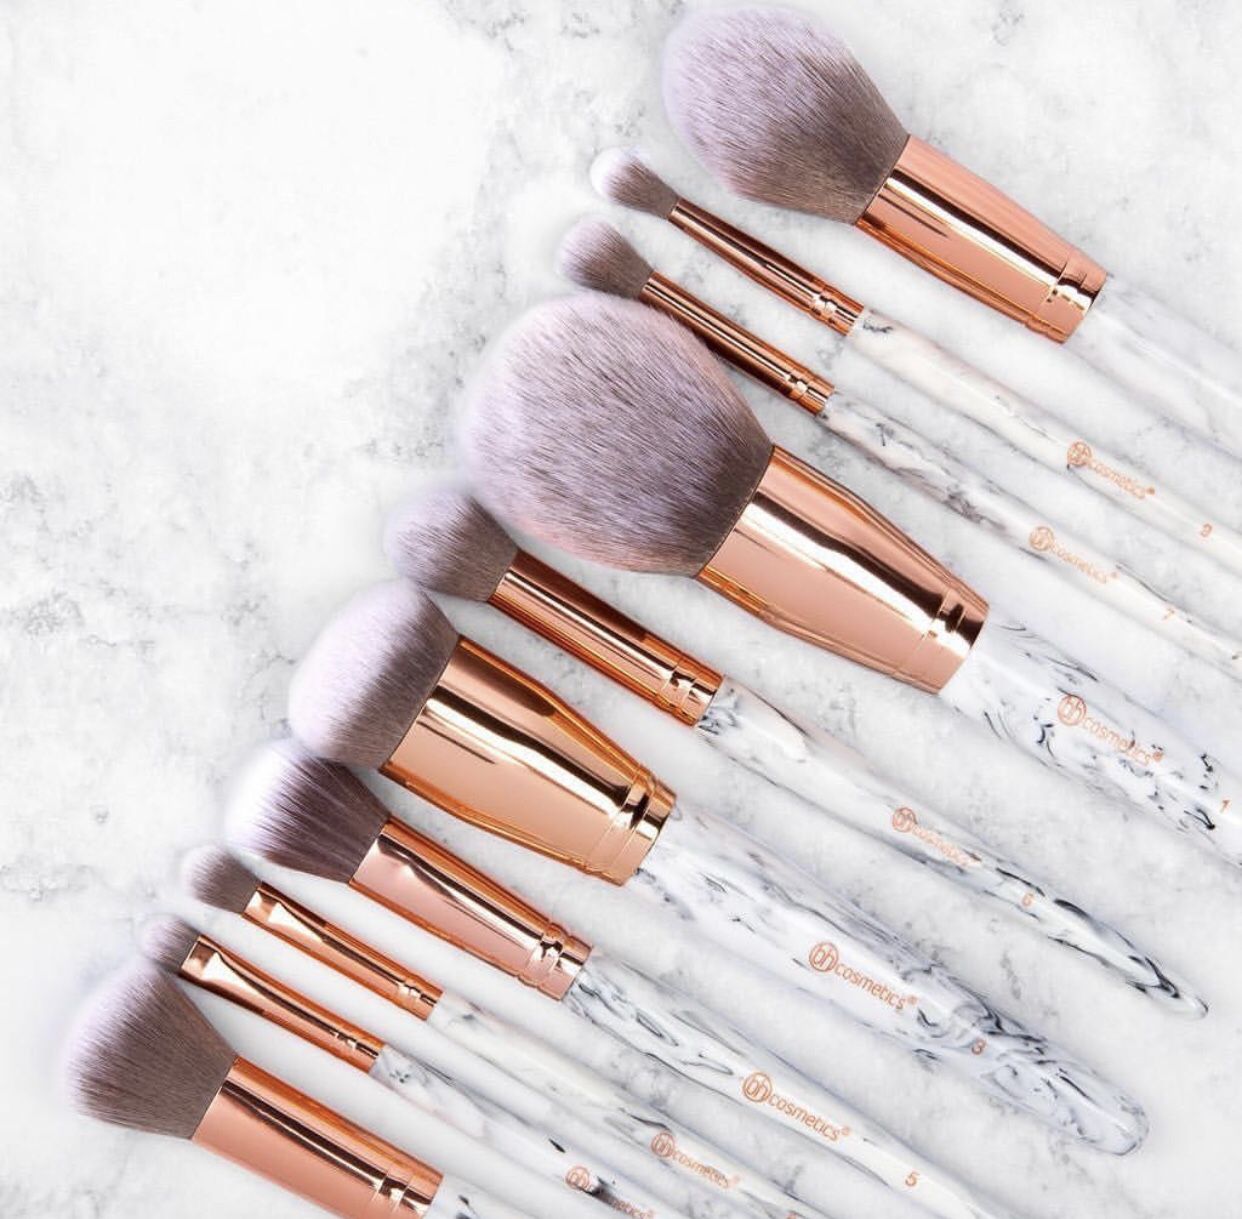 BH cosmetics marble luxe makeup brushes set of 10